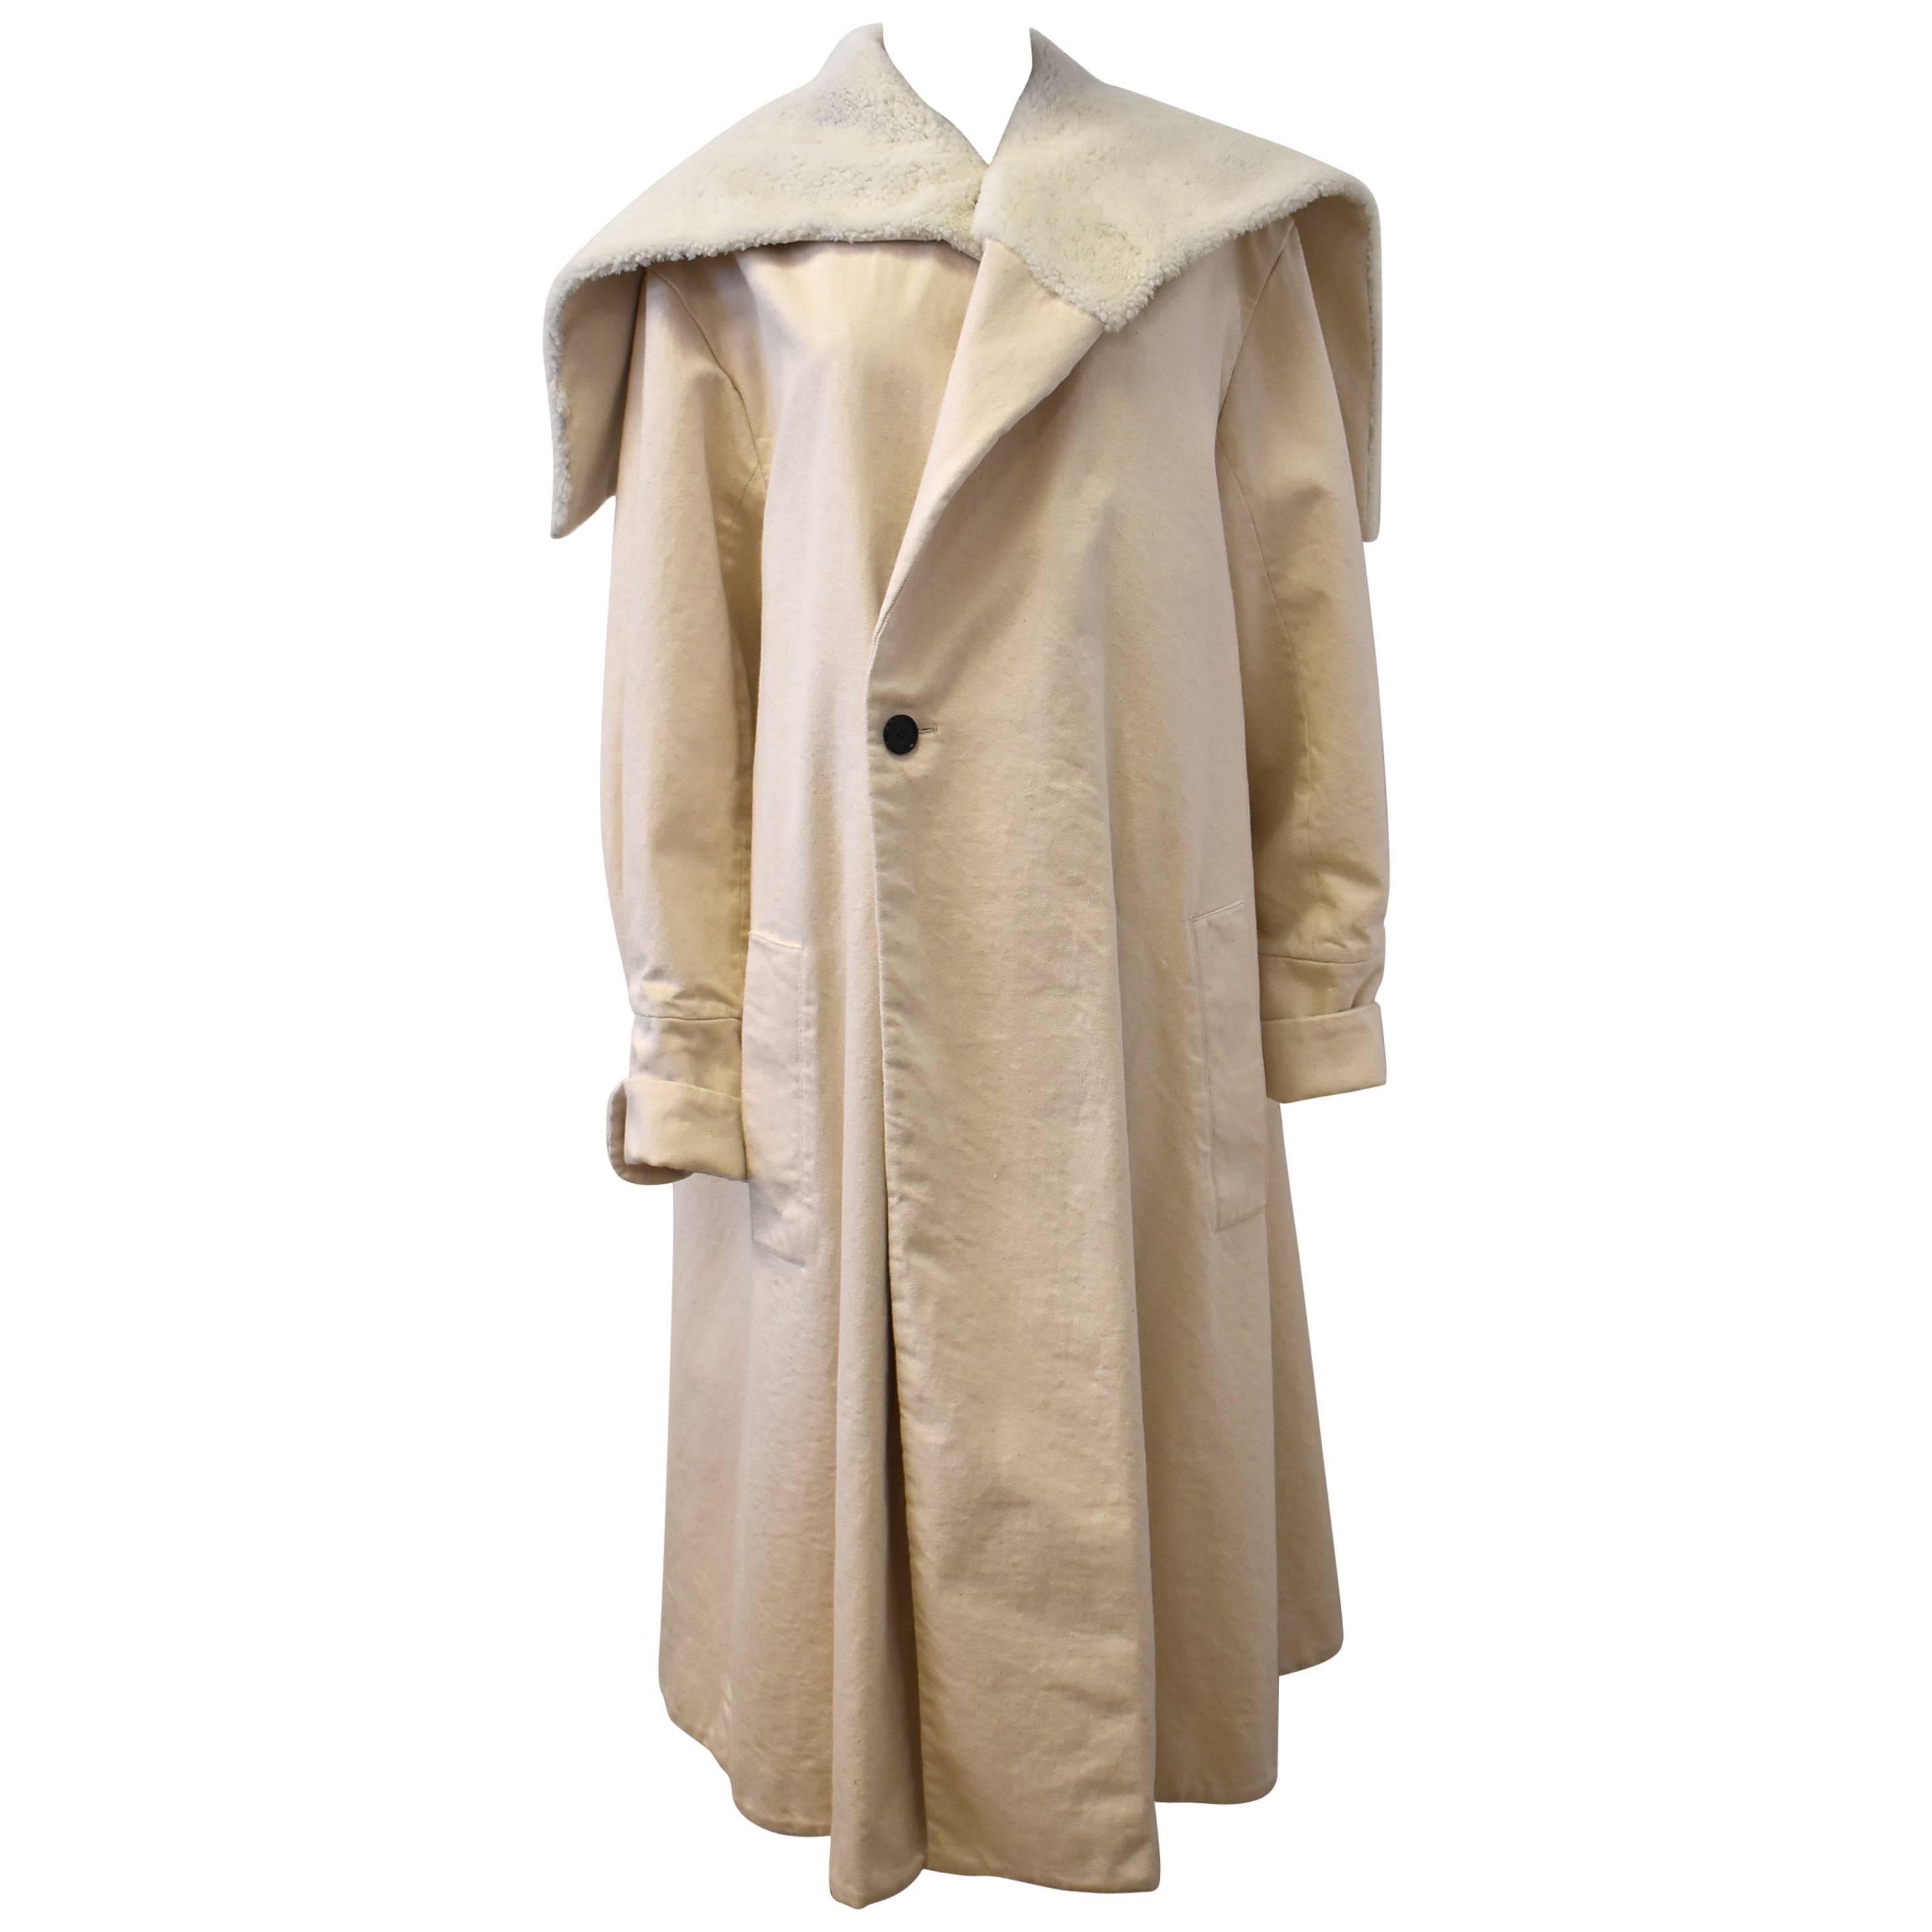 Loewe Cream Cotton Oversize Coat with Shearling Collar 